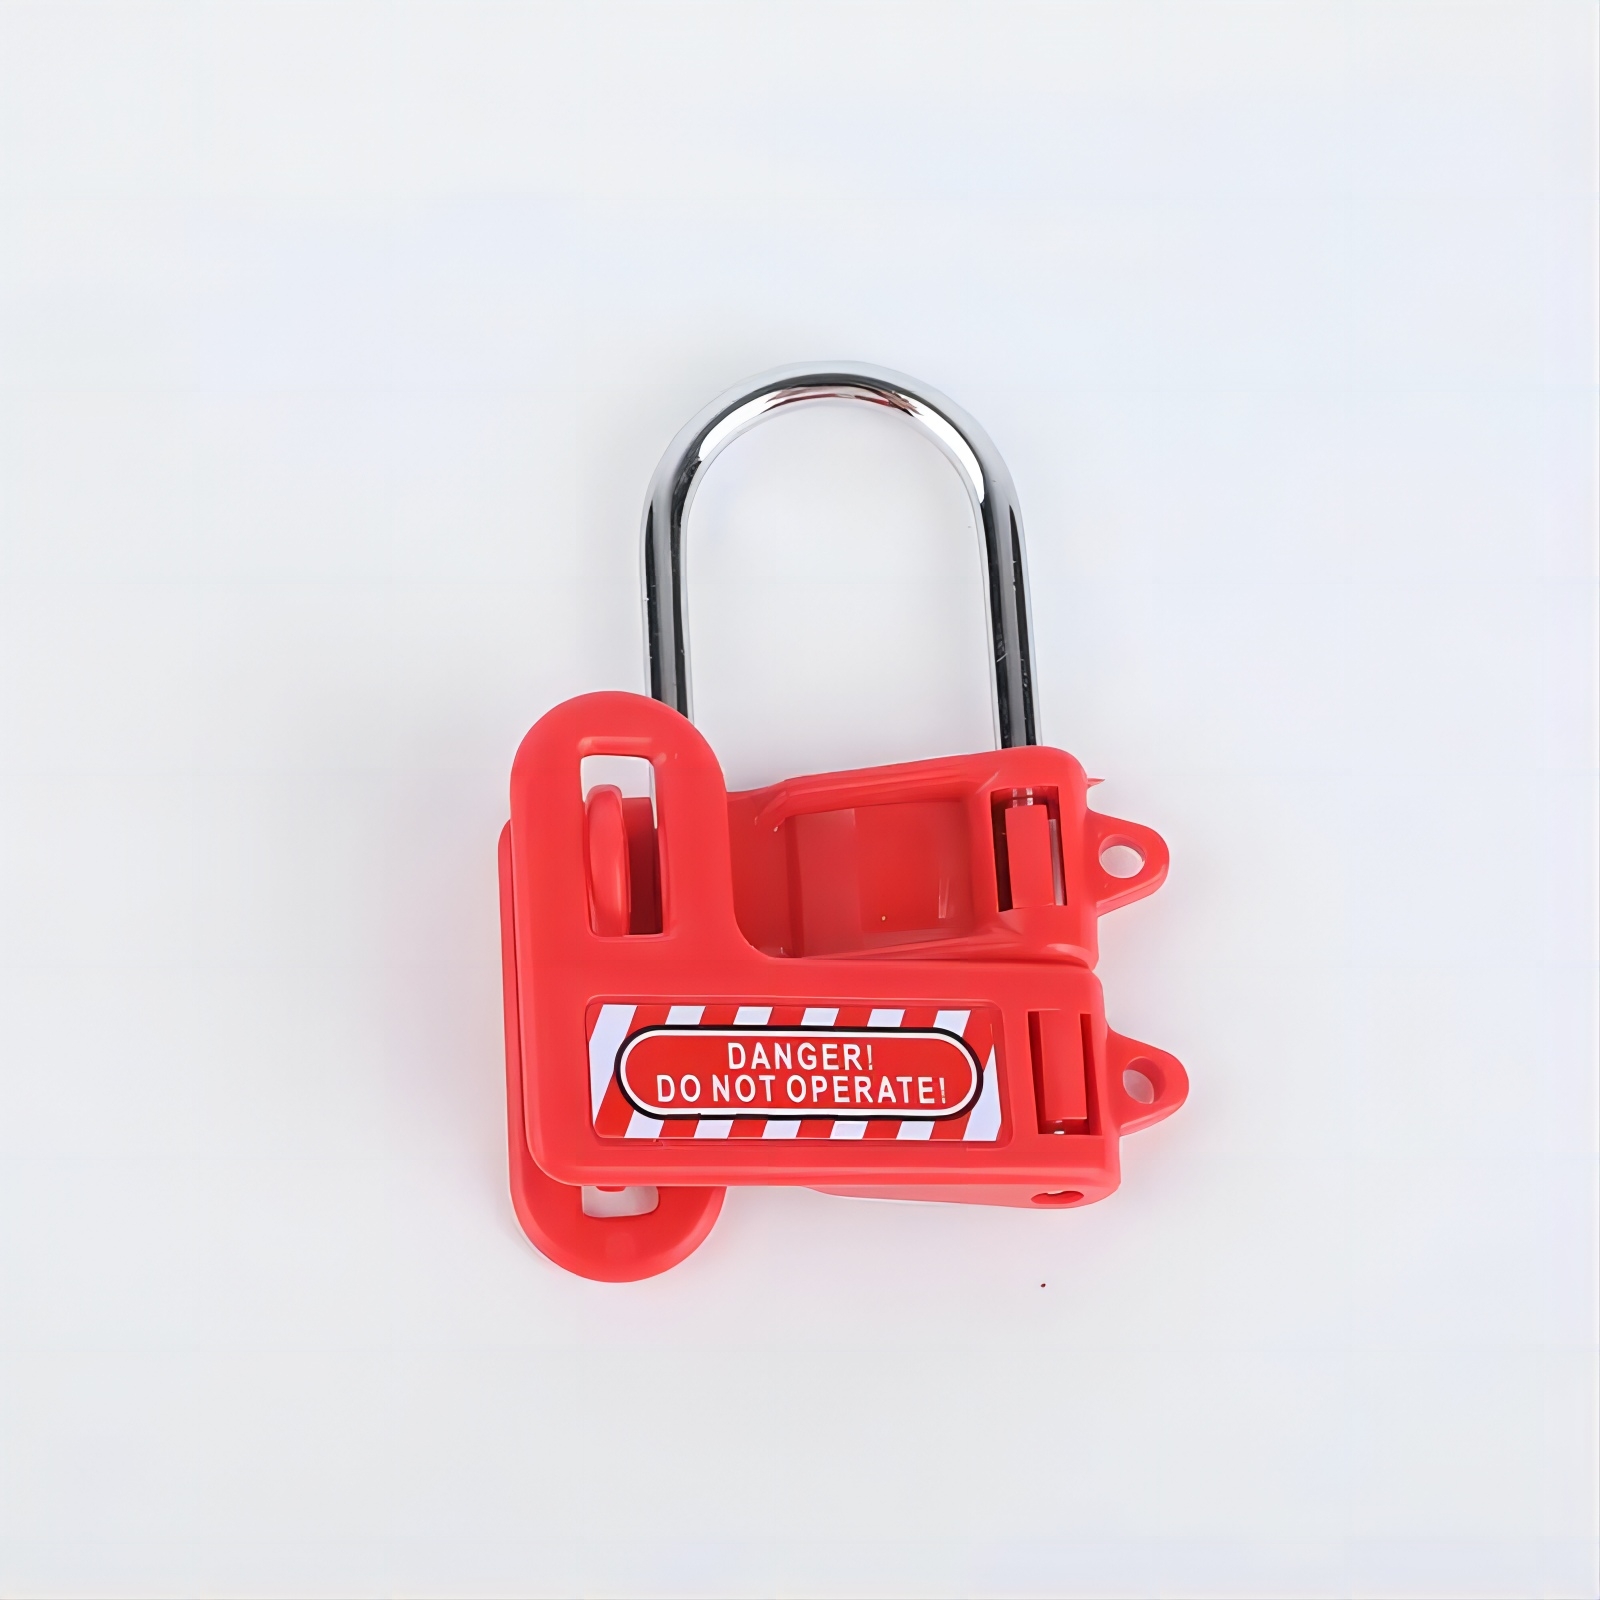 Butterfly anti-pry hasp lock